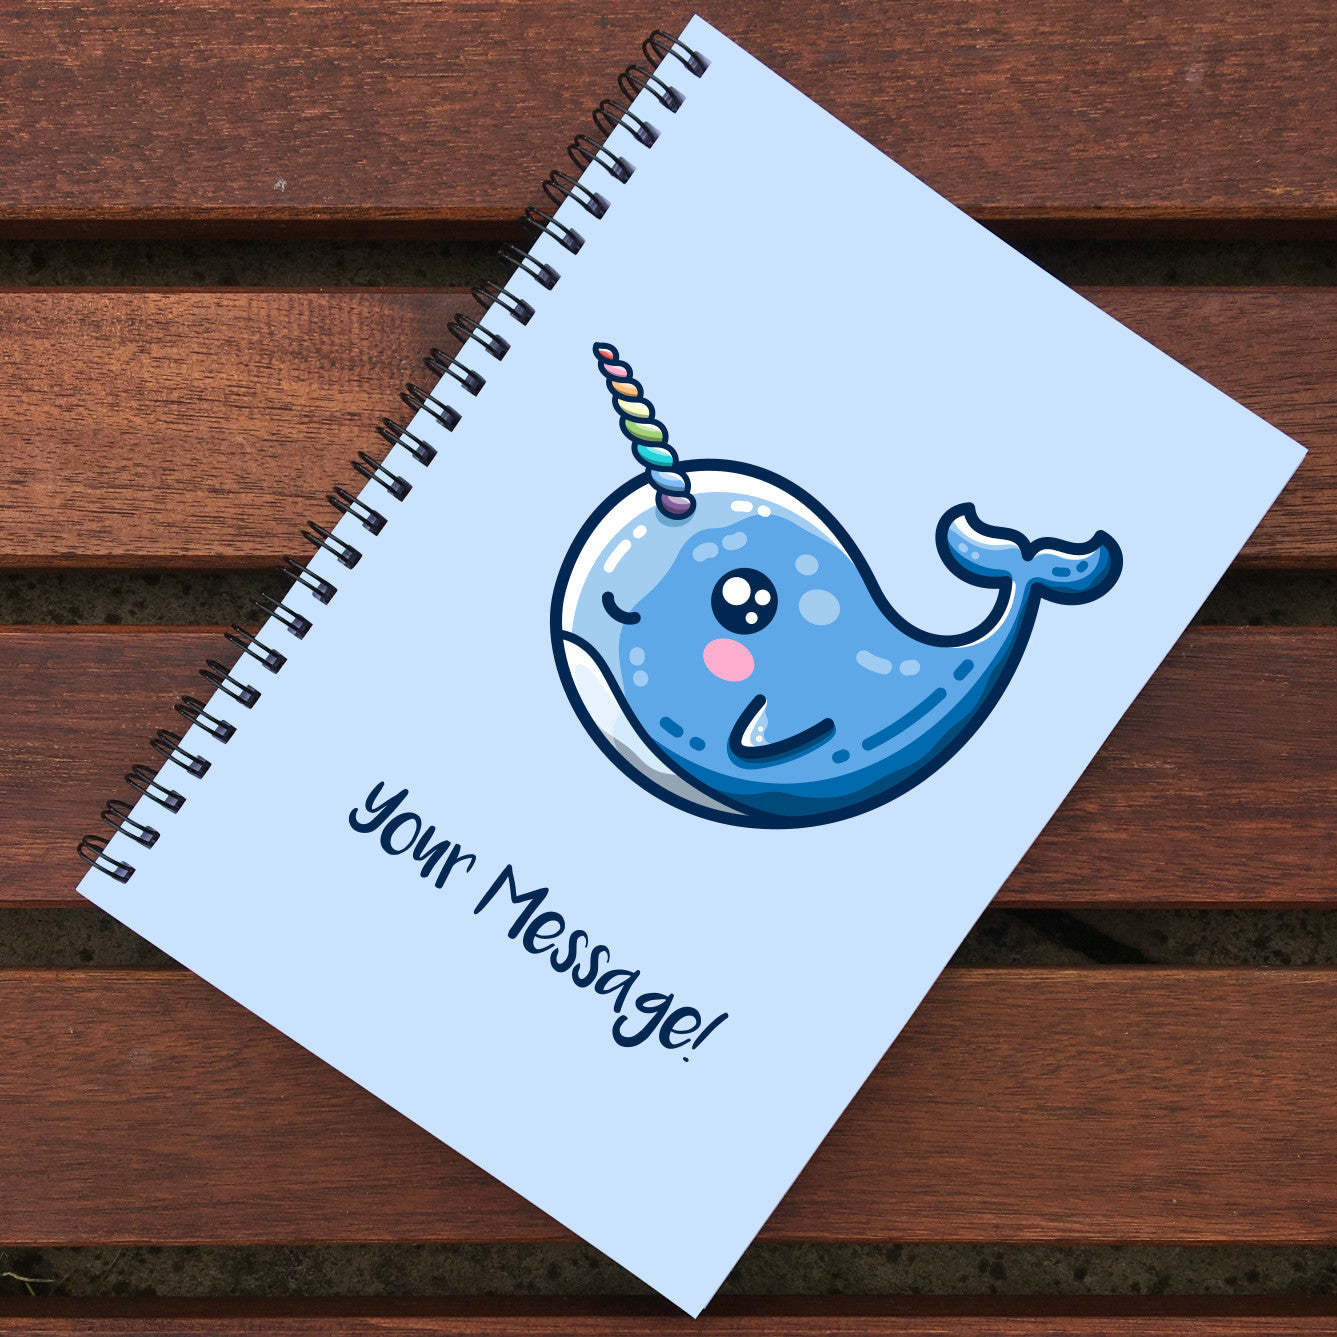 Closed notebook showing blue front cover with personalisation and cute narwhal design